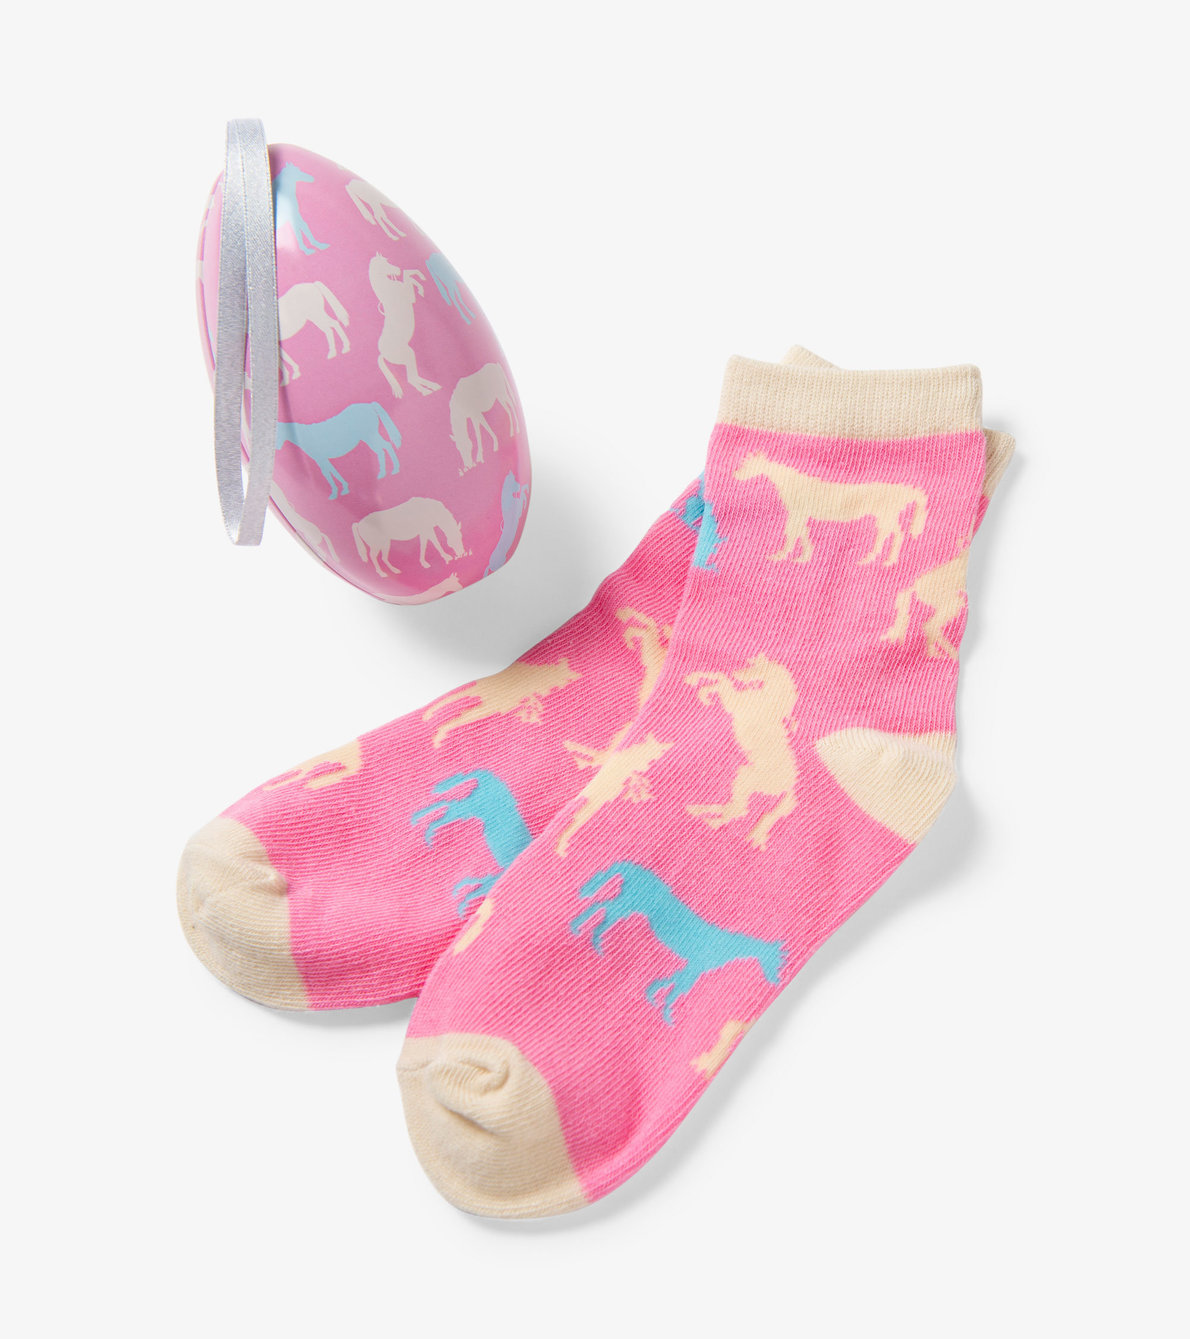 View larger image of Horse Silhouettes Kids Socks In Eggs